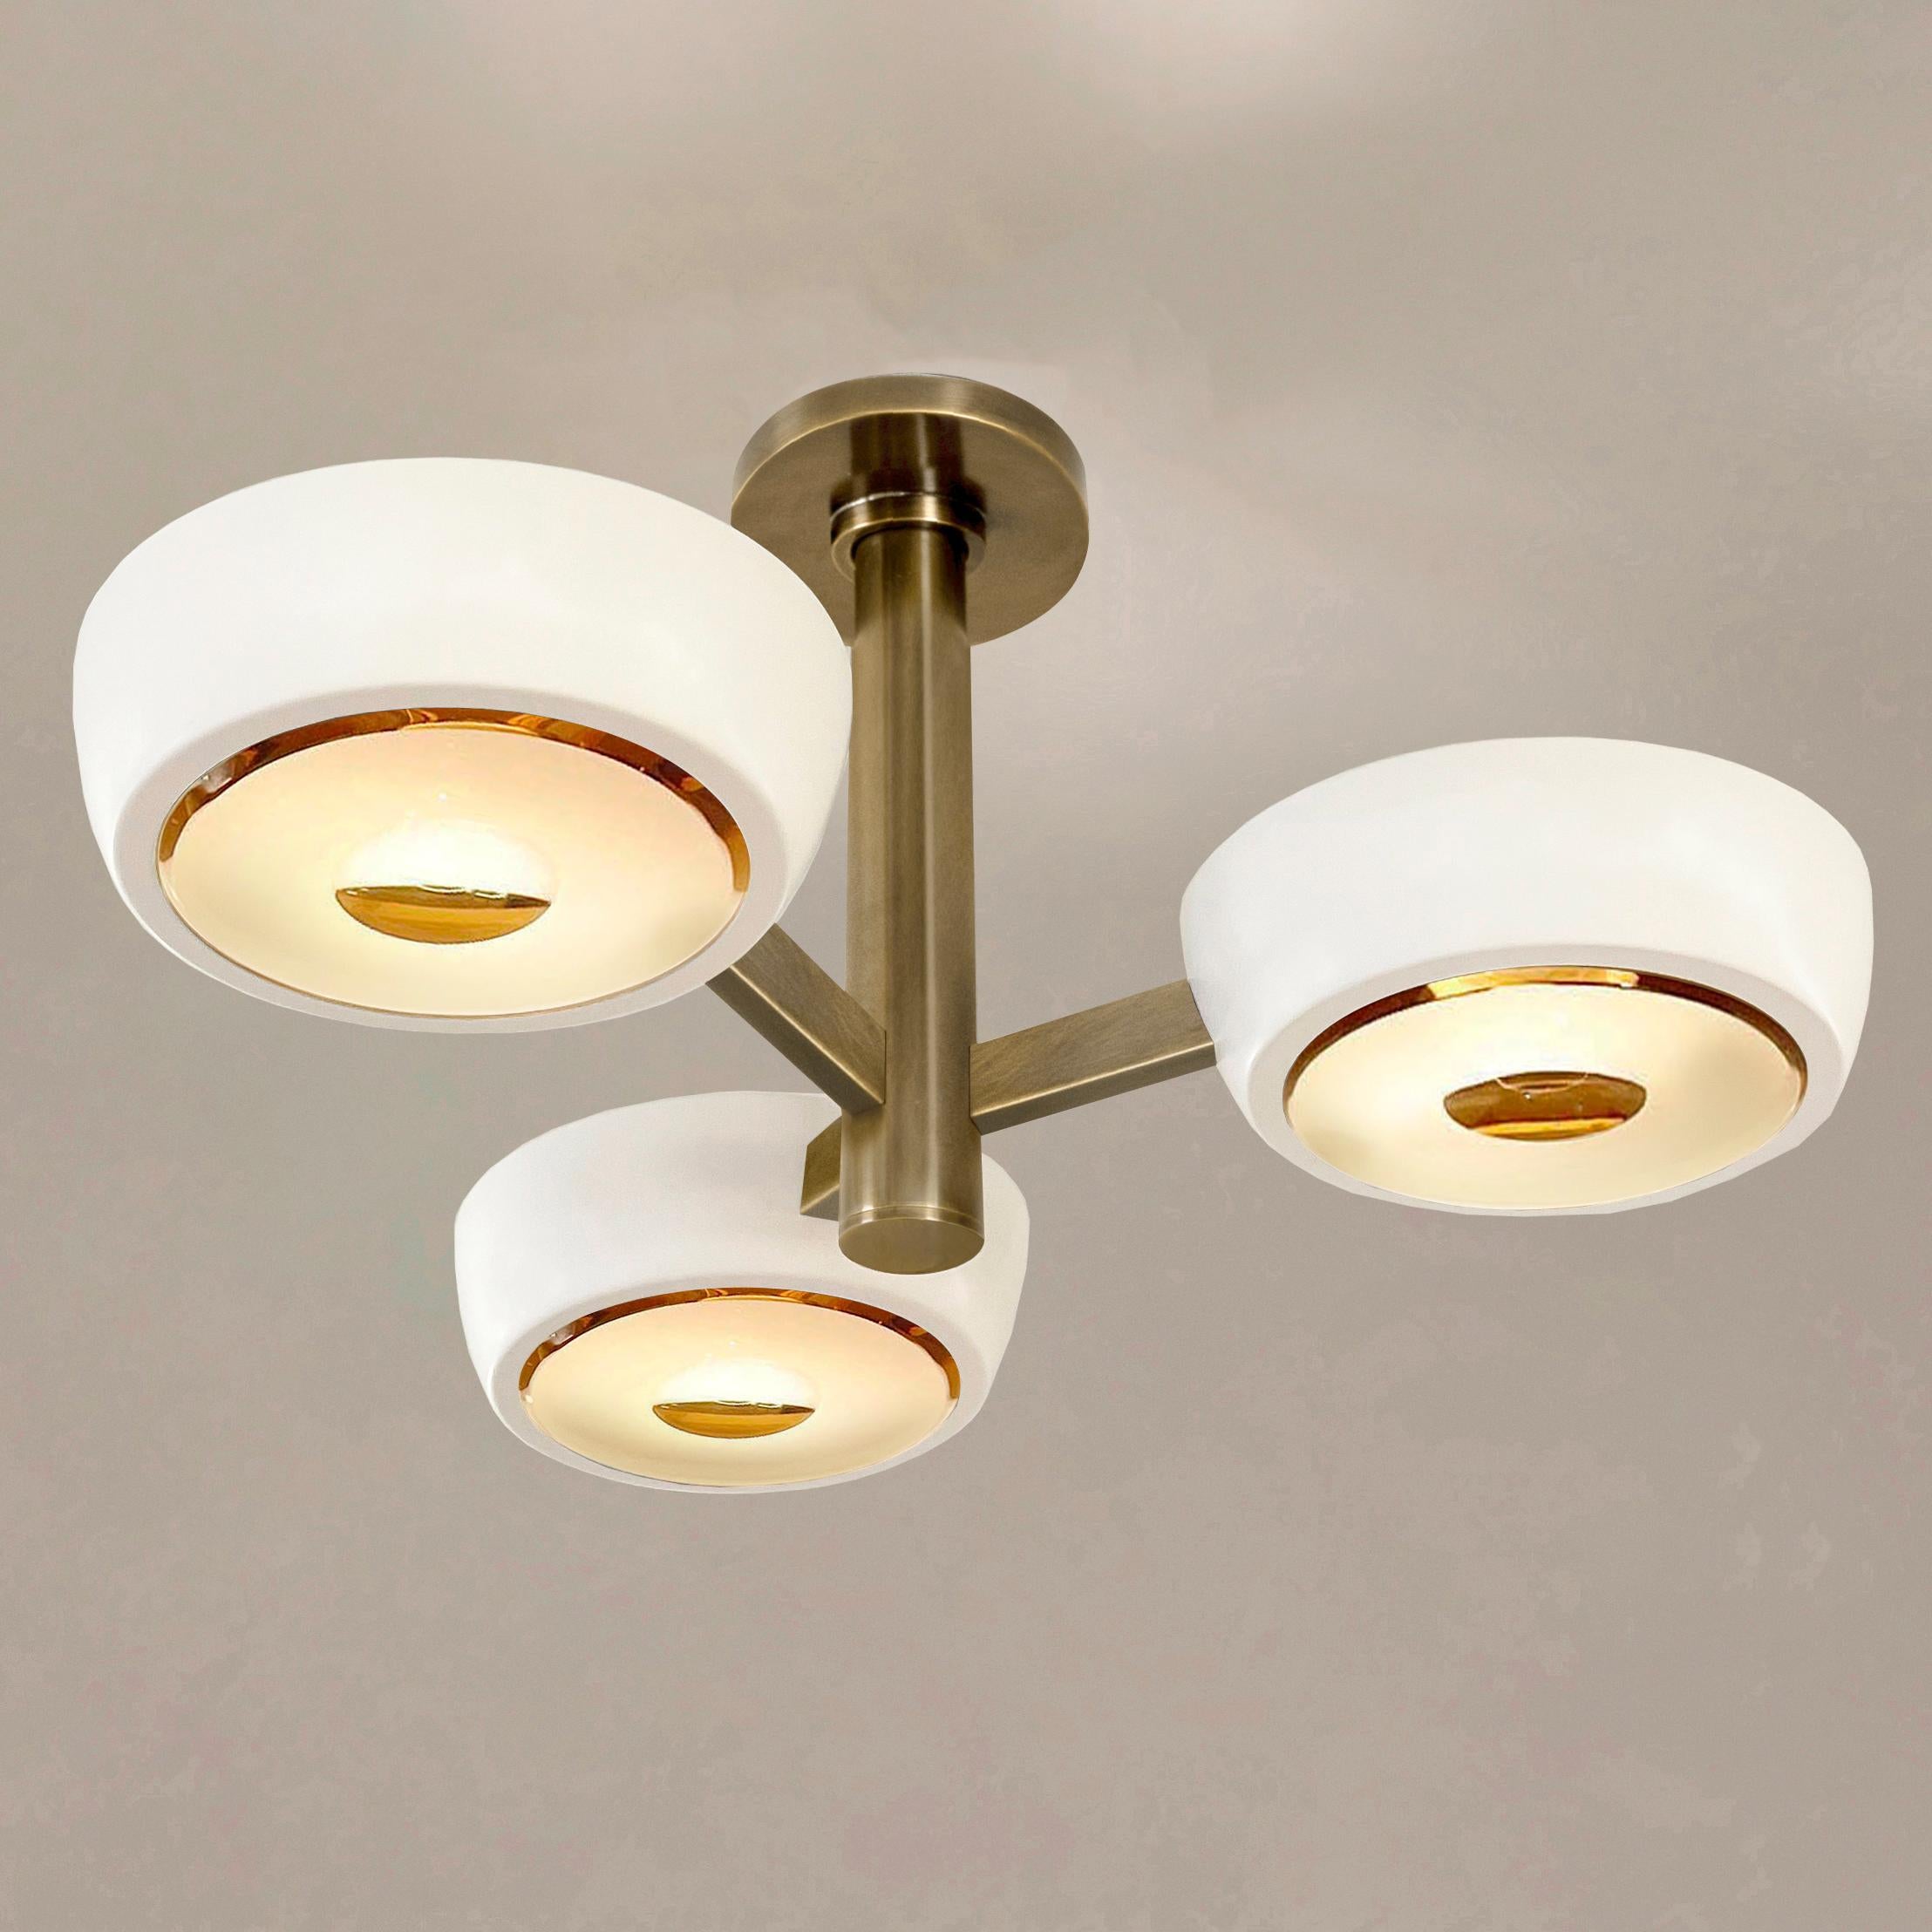 The Rose Piccolo ceiling light is the smallest member of the Rose family, distinguished by its branching frame ending with clean and modern shades. With the option to customize the color of the shades, the finish of the metal and the type of glass,